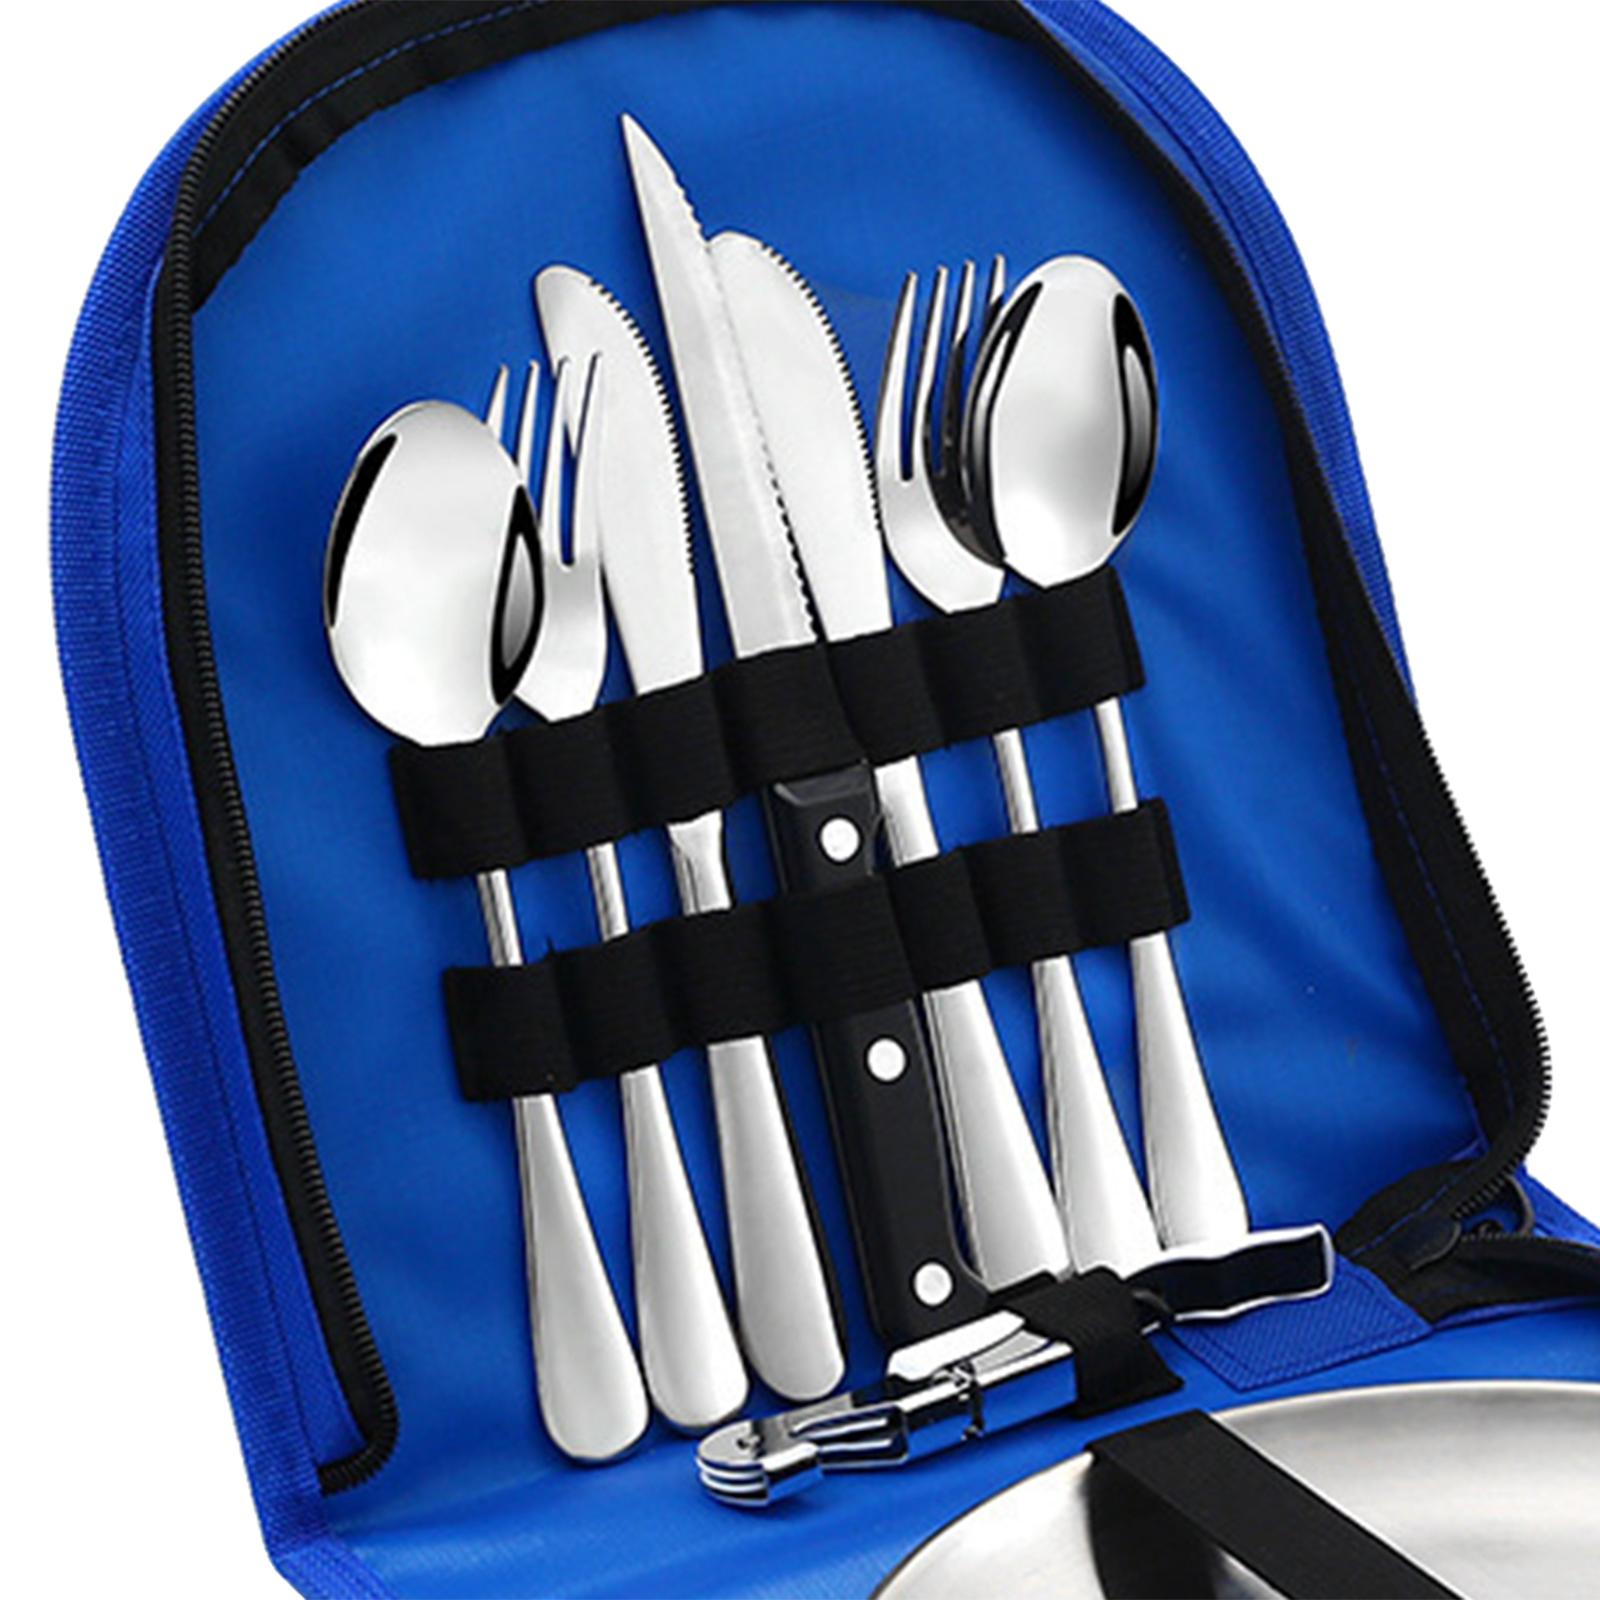 10 Pieces Picnic Family Cutlery Set with Travel Case for Barbecue Hiking Blue